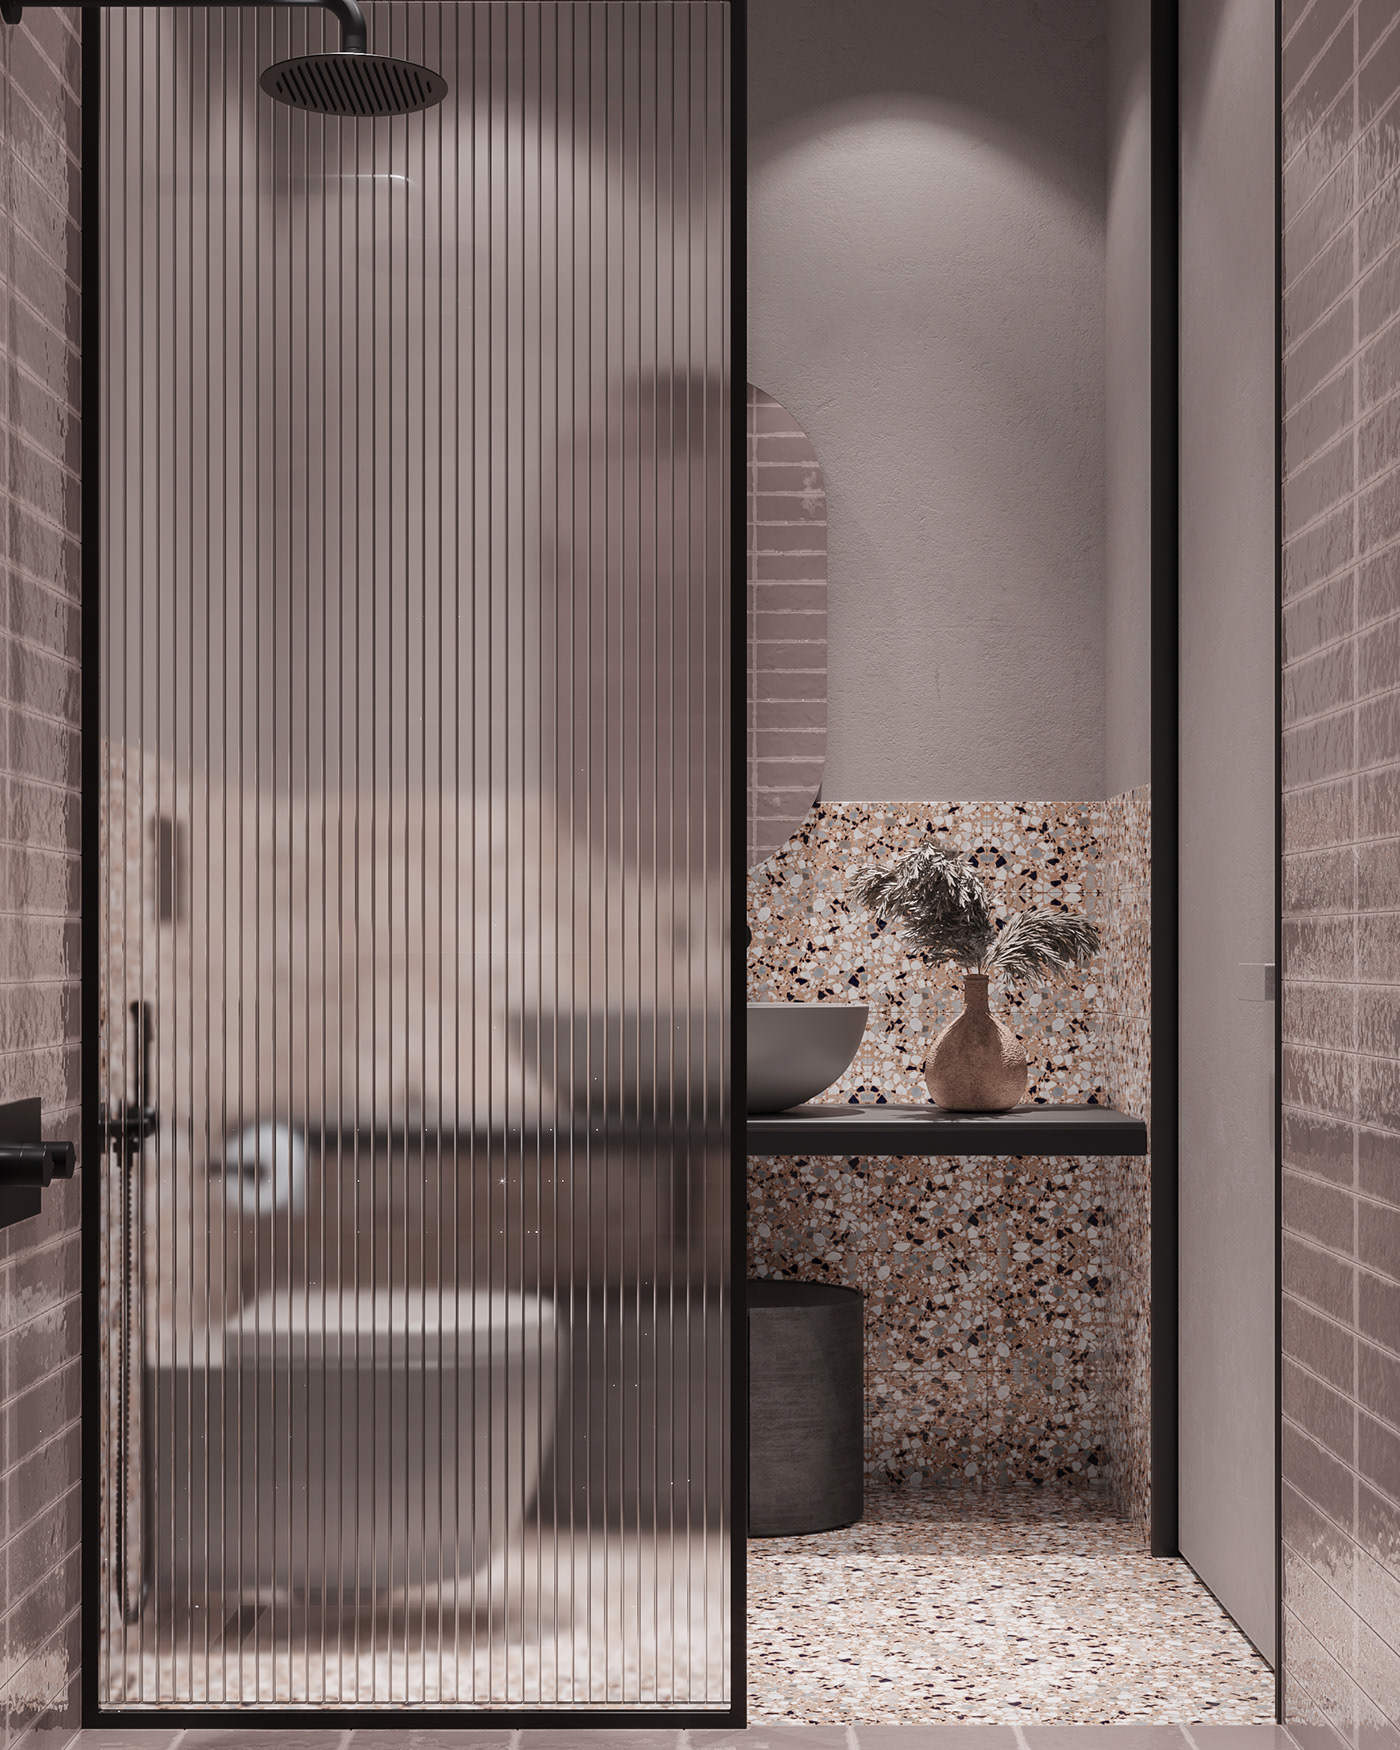 The WC area is separate from the bathing area. The floor and walls are paved with pebble-patterned marbles, creating a sense of closeness to nature.